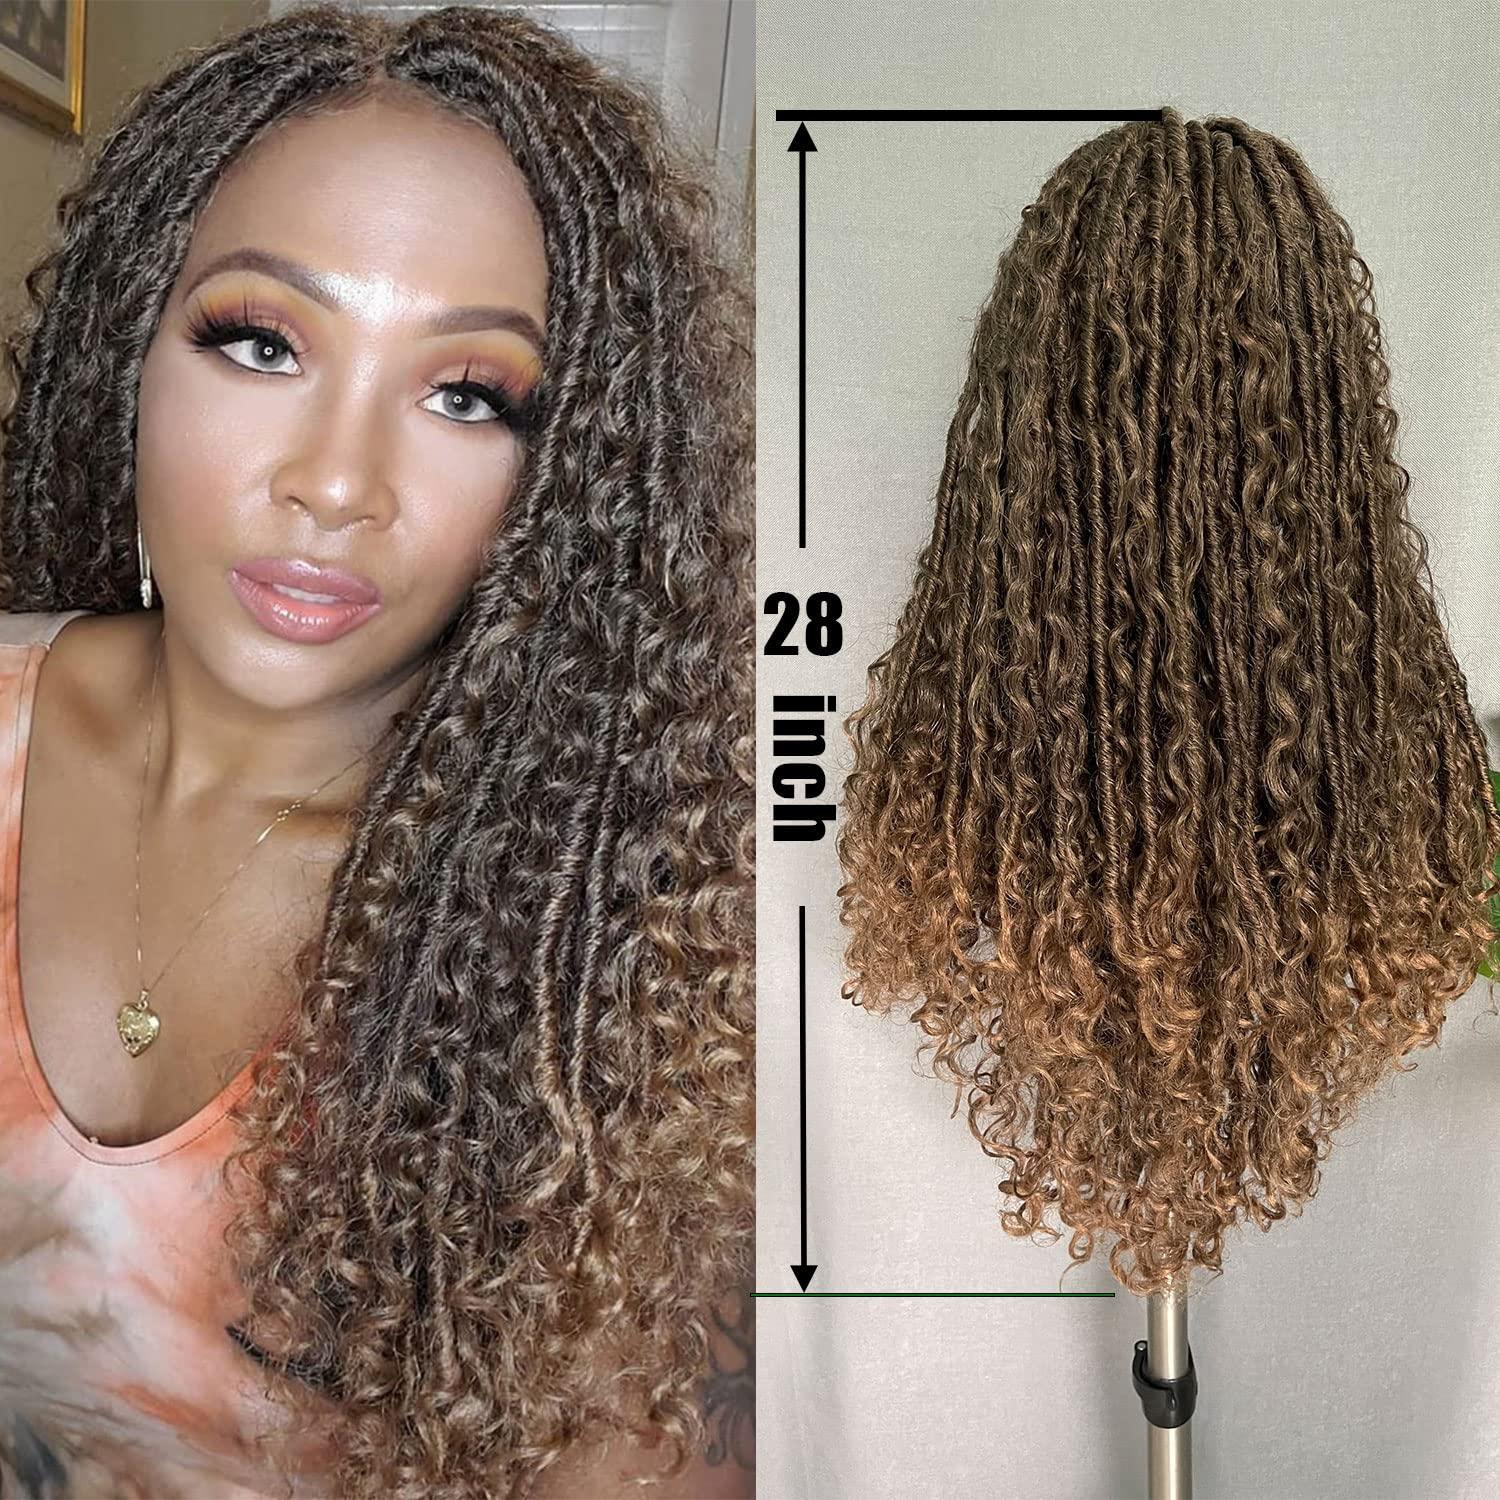 Goddess Locs Ombre Lace Front Braided Wig Faux Locs Curly Crochet Hair Wig